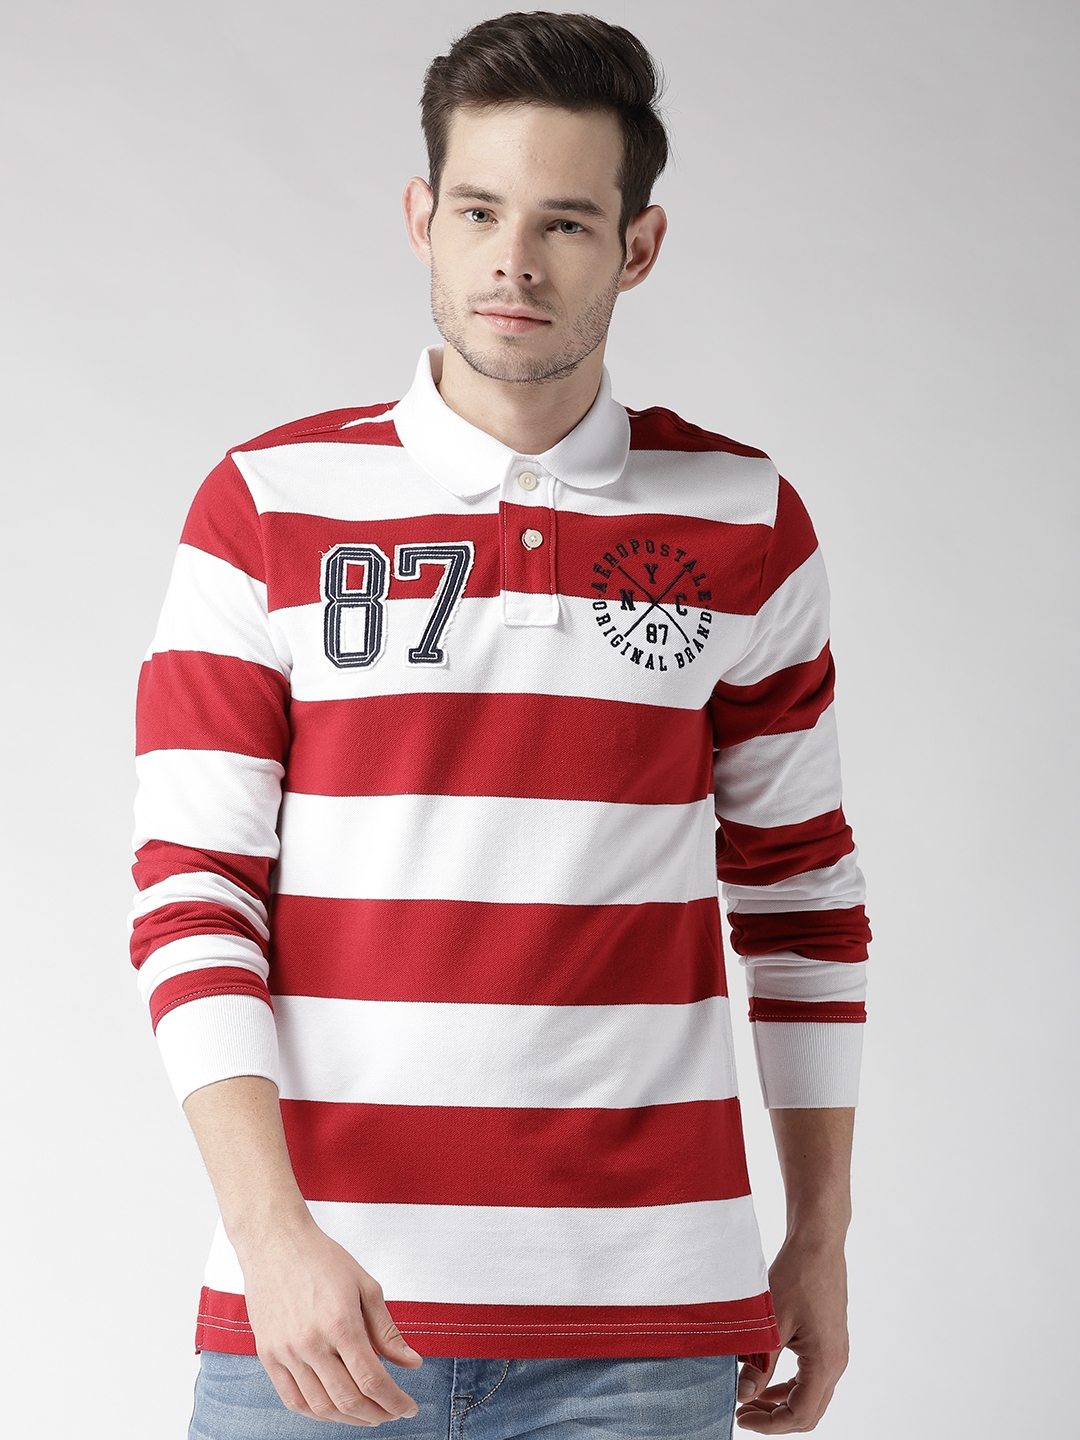 mens red and white striped t shirt